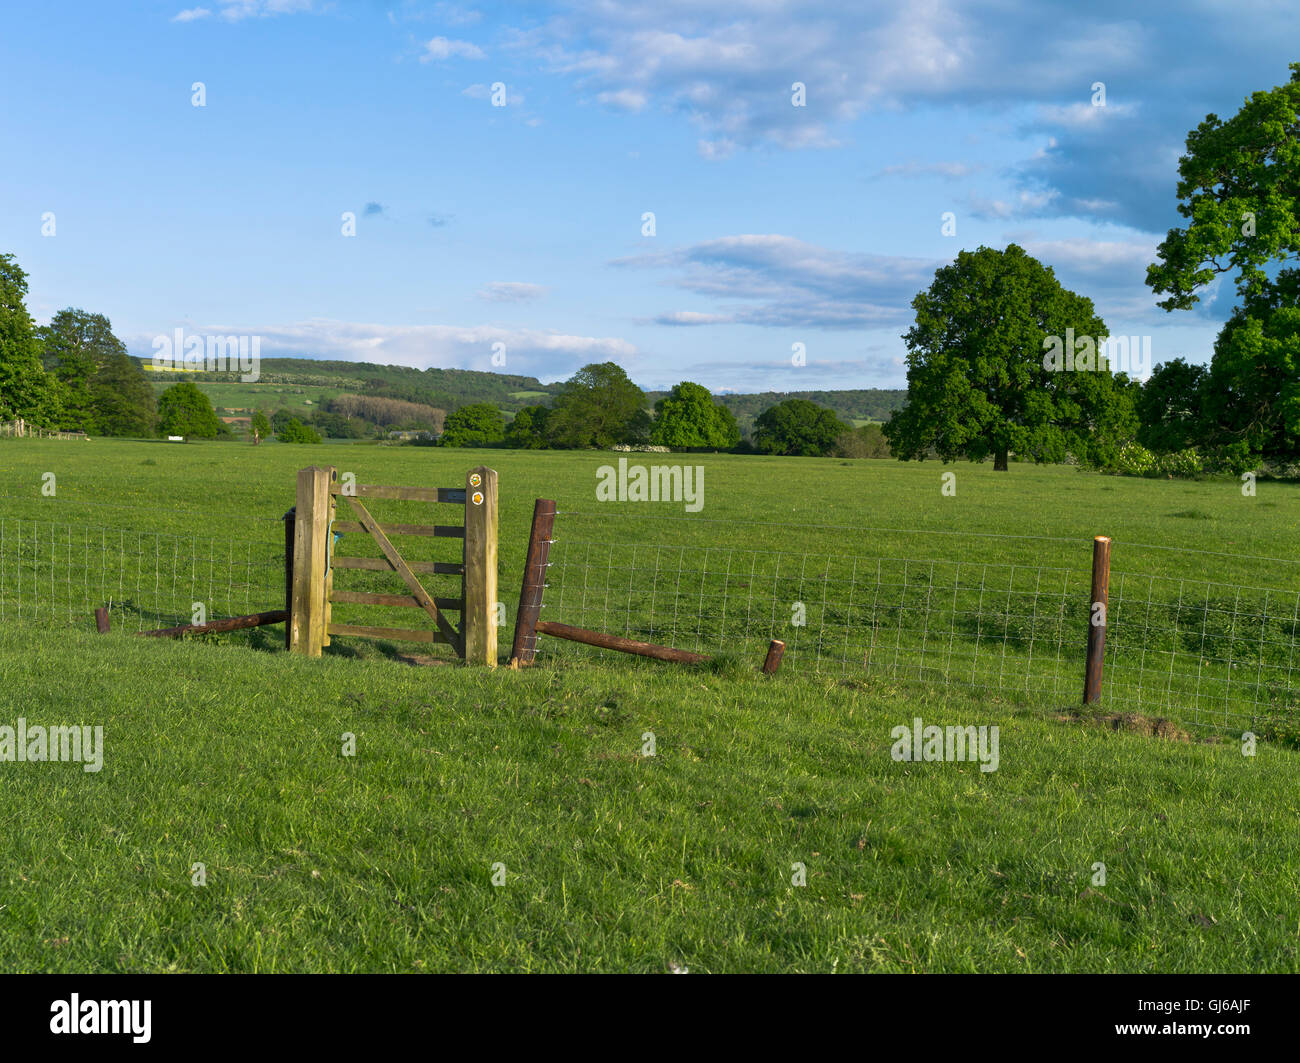 dh WINCHCOMBE GLOUCESTERSHIRE Wardens Way footpath Field gate uk cotswold Campagna cotswolds passeggiata recinto estivo Foto Stock